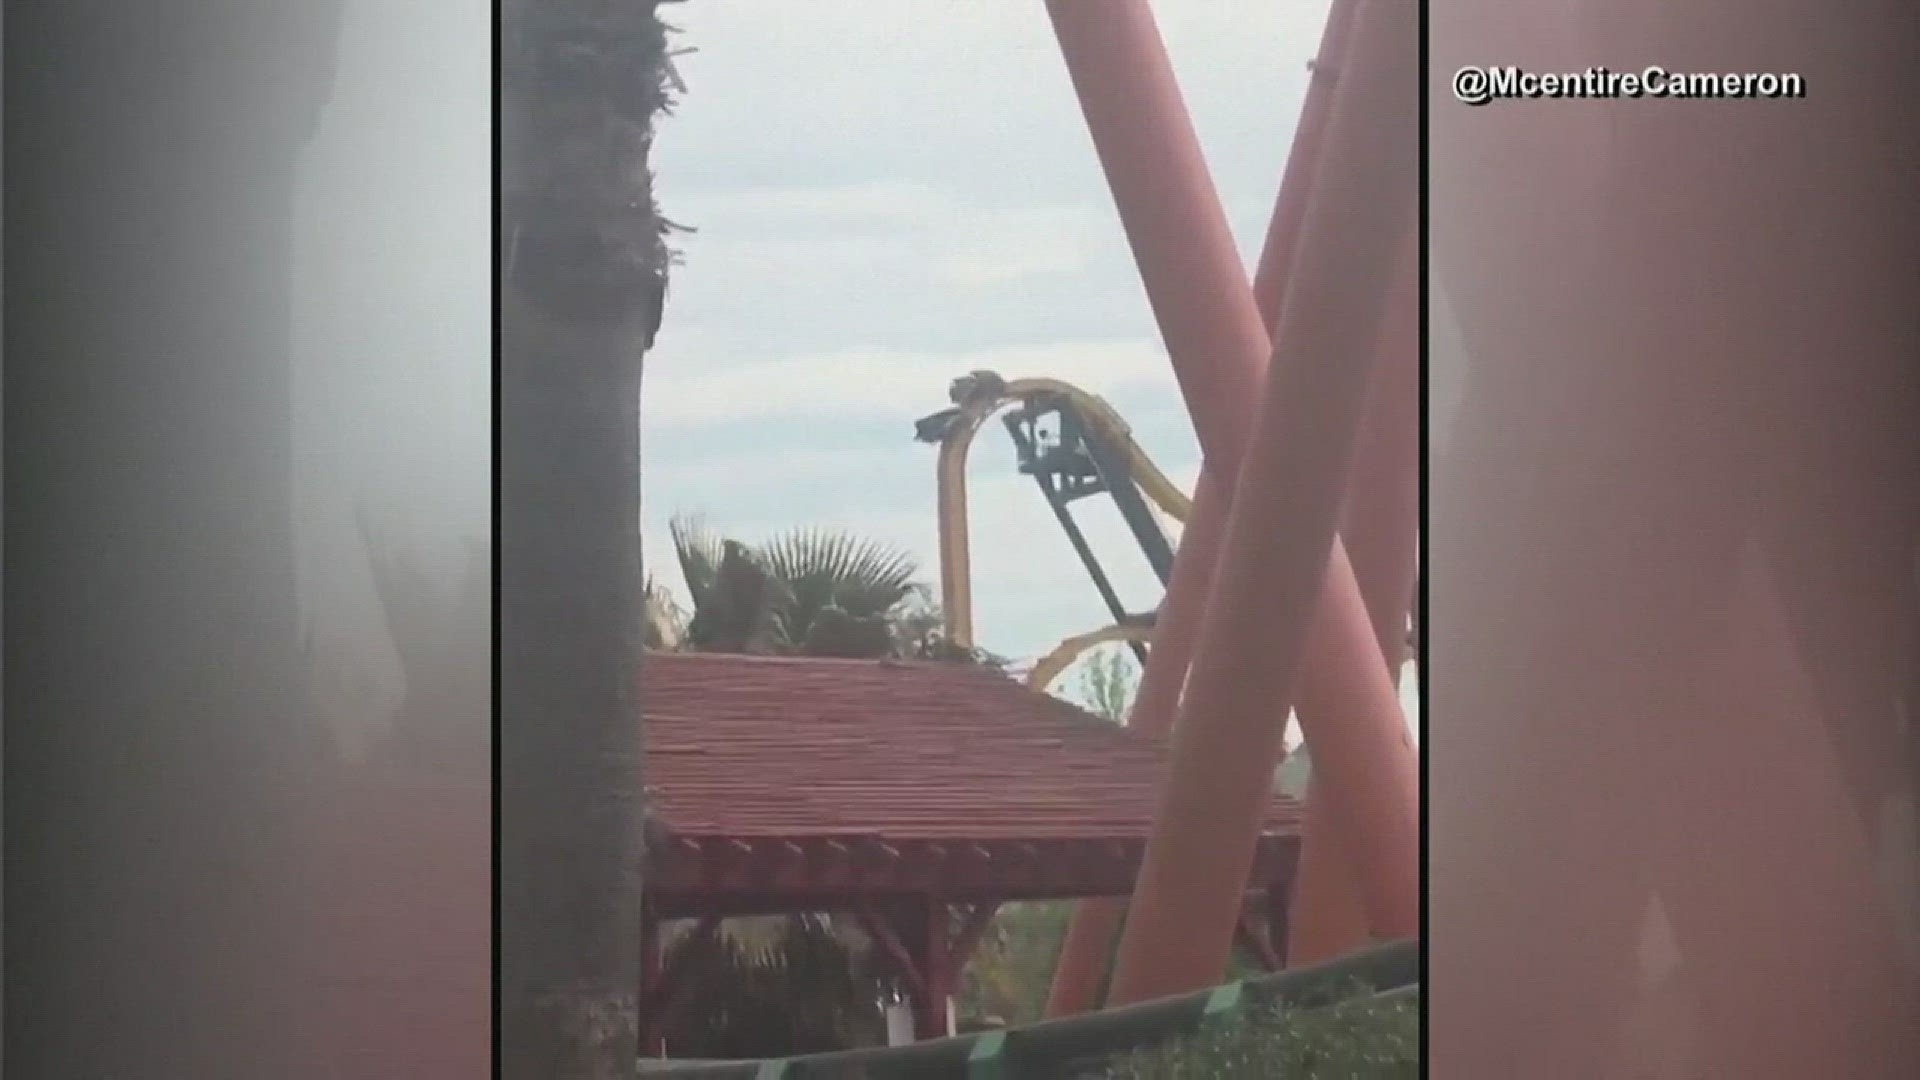 March 13, 2018: Passengers on the Batman roller coaster at Six Flags Fiesta Texas found themselves stuck in the air Tuesday afternoon after a safety sensor went off, stopping the coaster for 45 minutes.